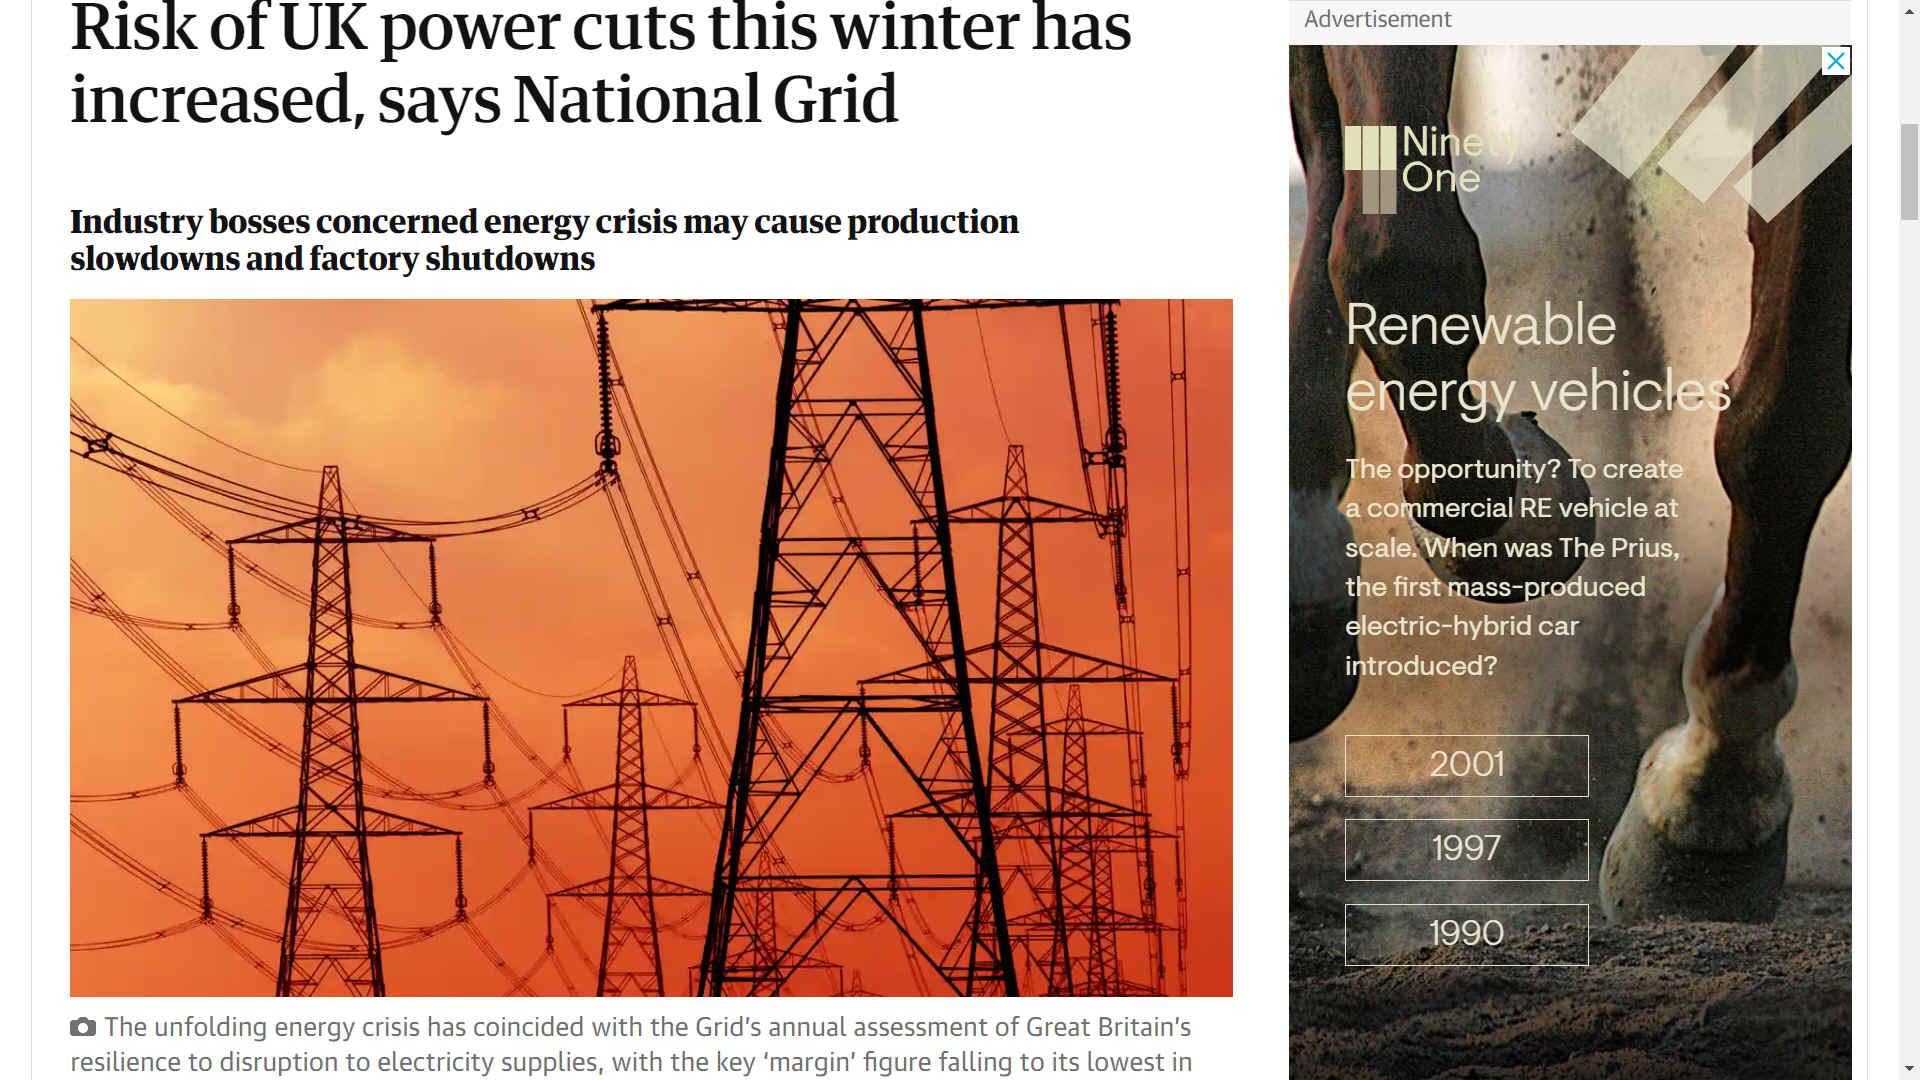 Guardian October 2021, risk of power cuts increased says National Grid